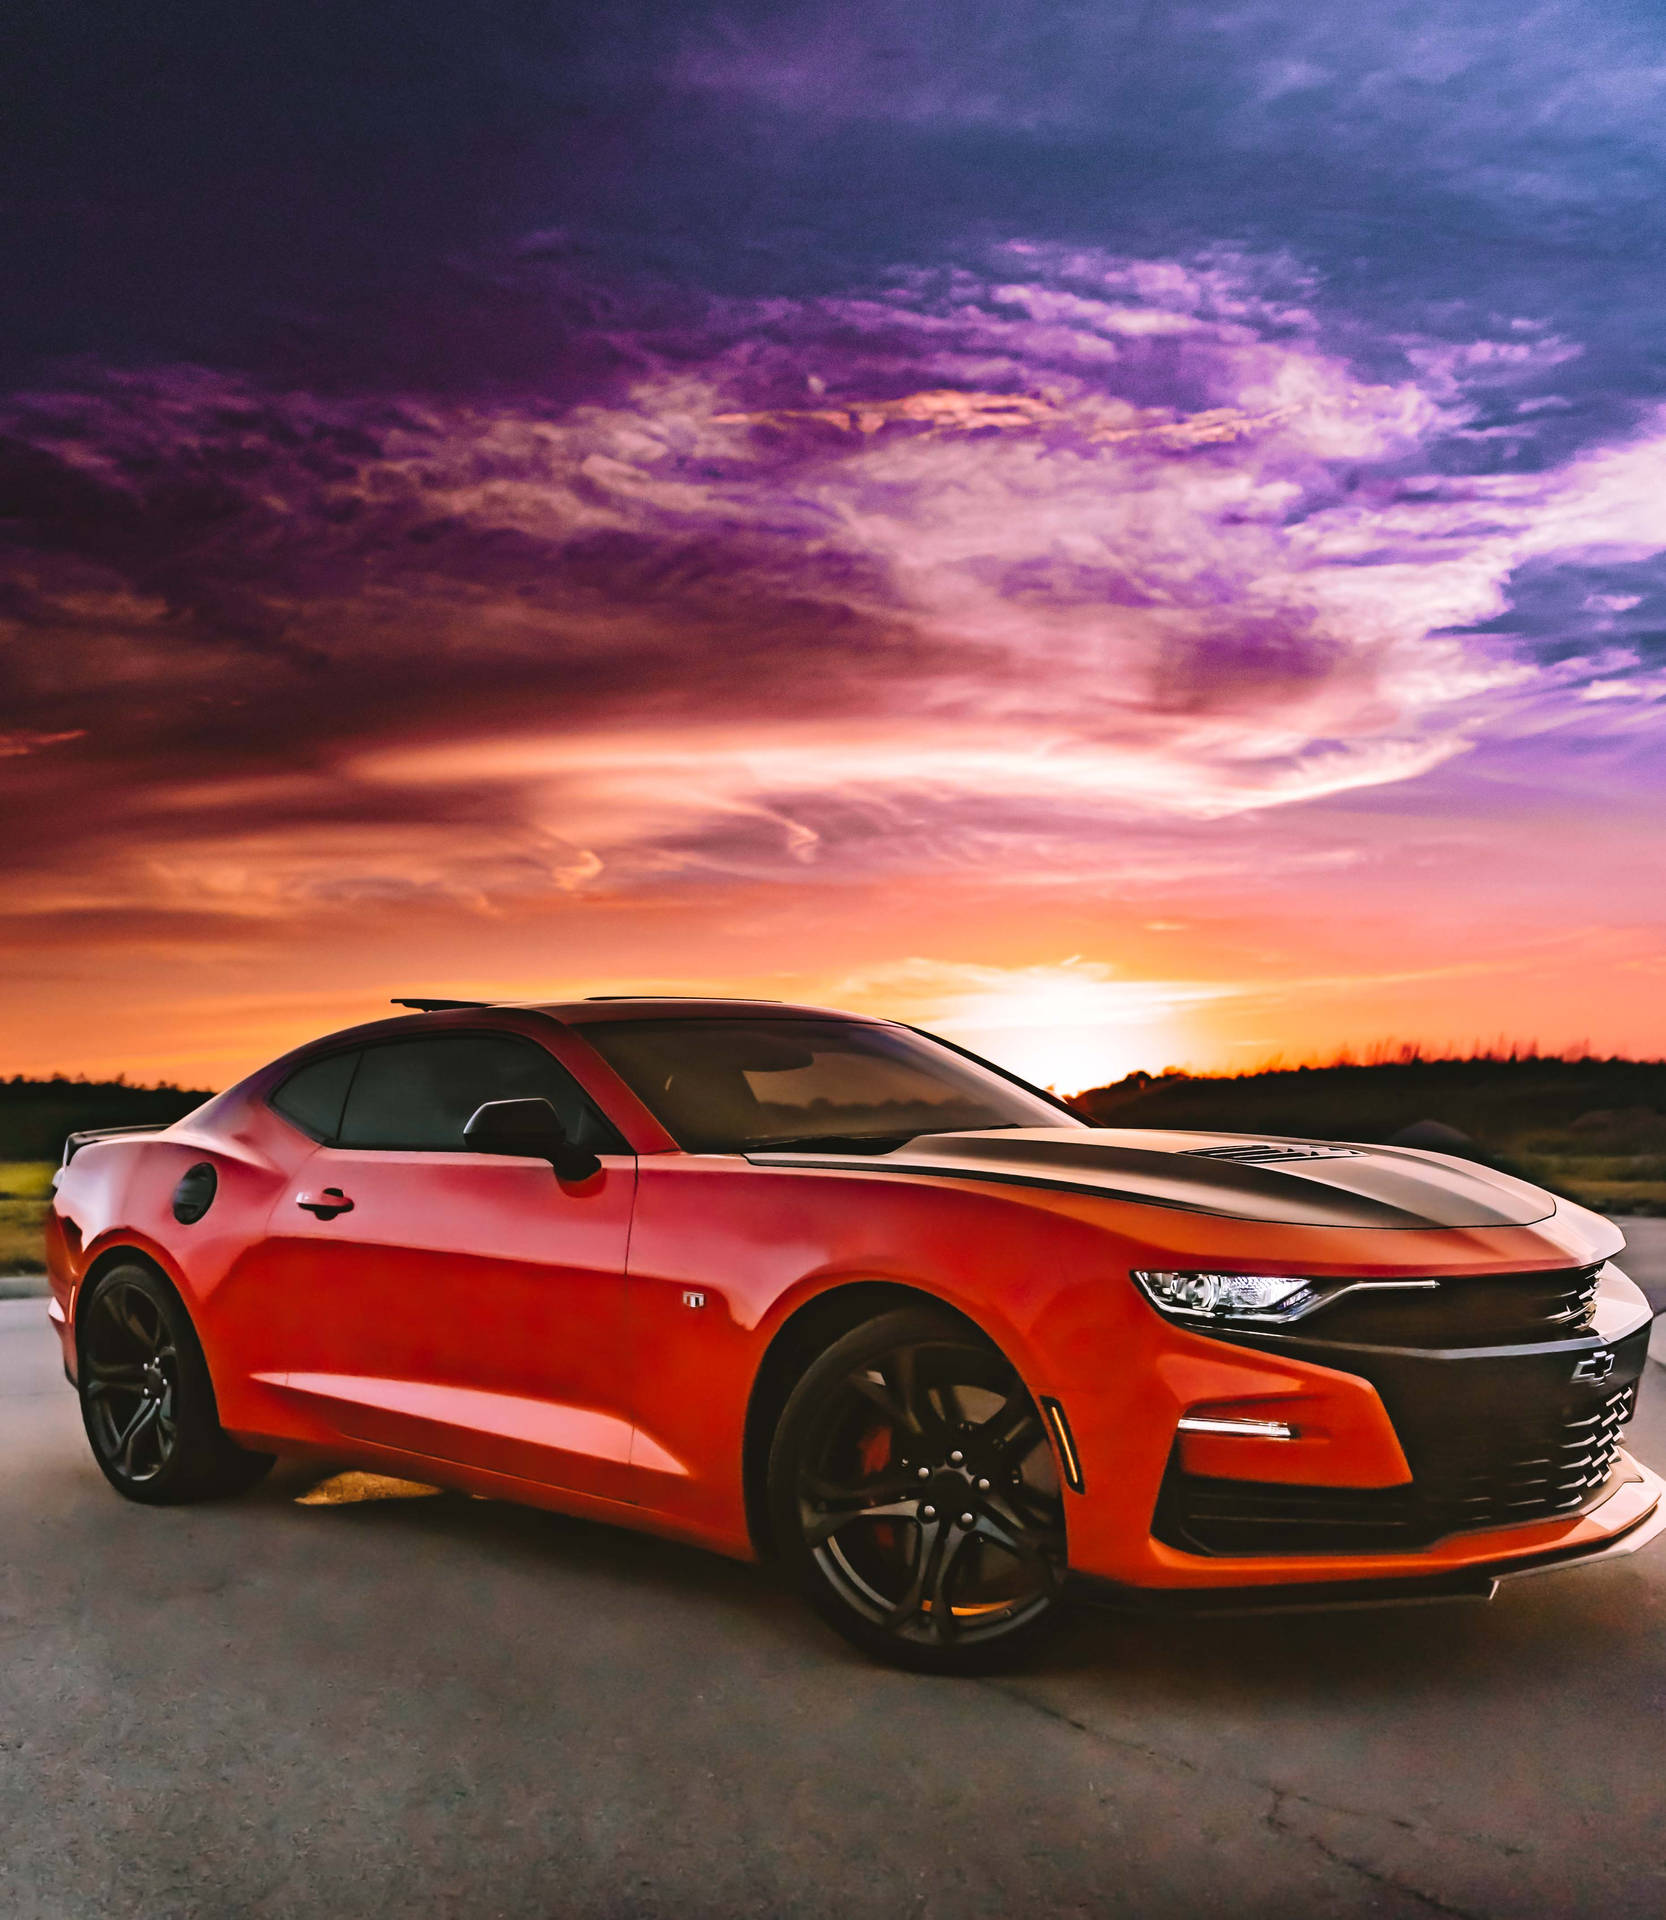 Chevrolet Car With Sunset Wallpaper